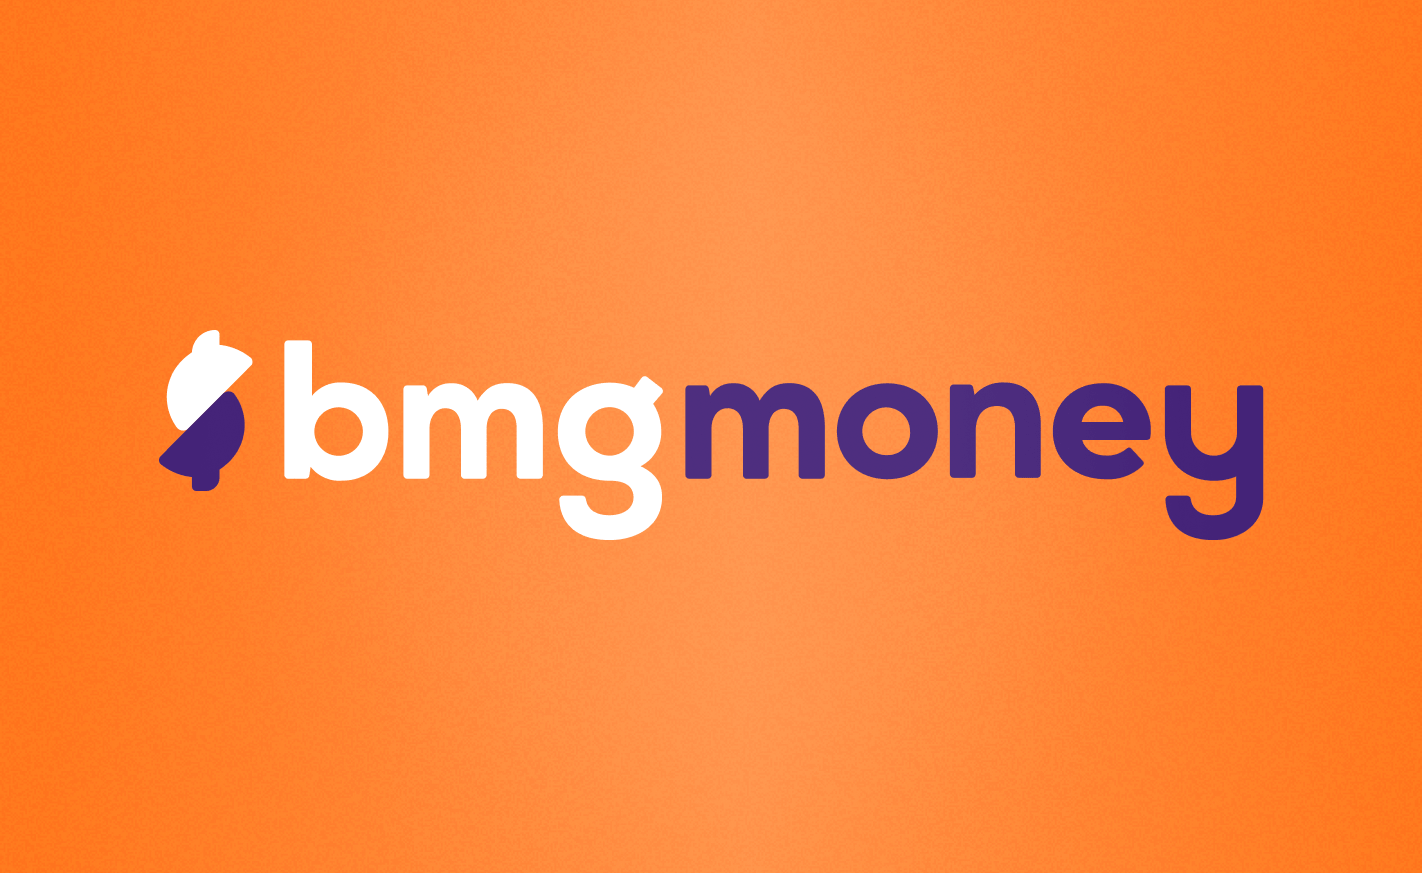 BMG Money increases qualified leads by 42% and cuts cost per lead by 51%